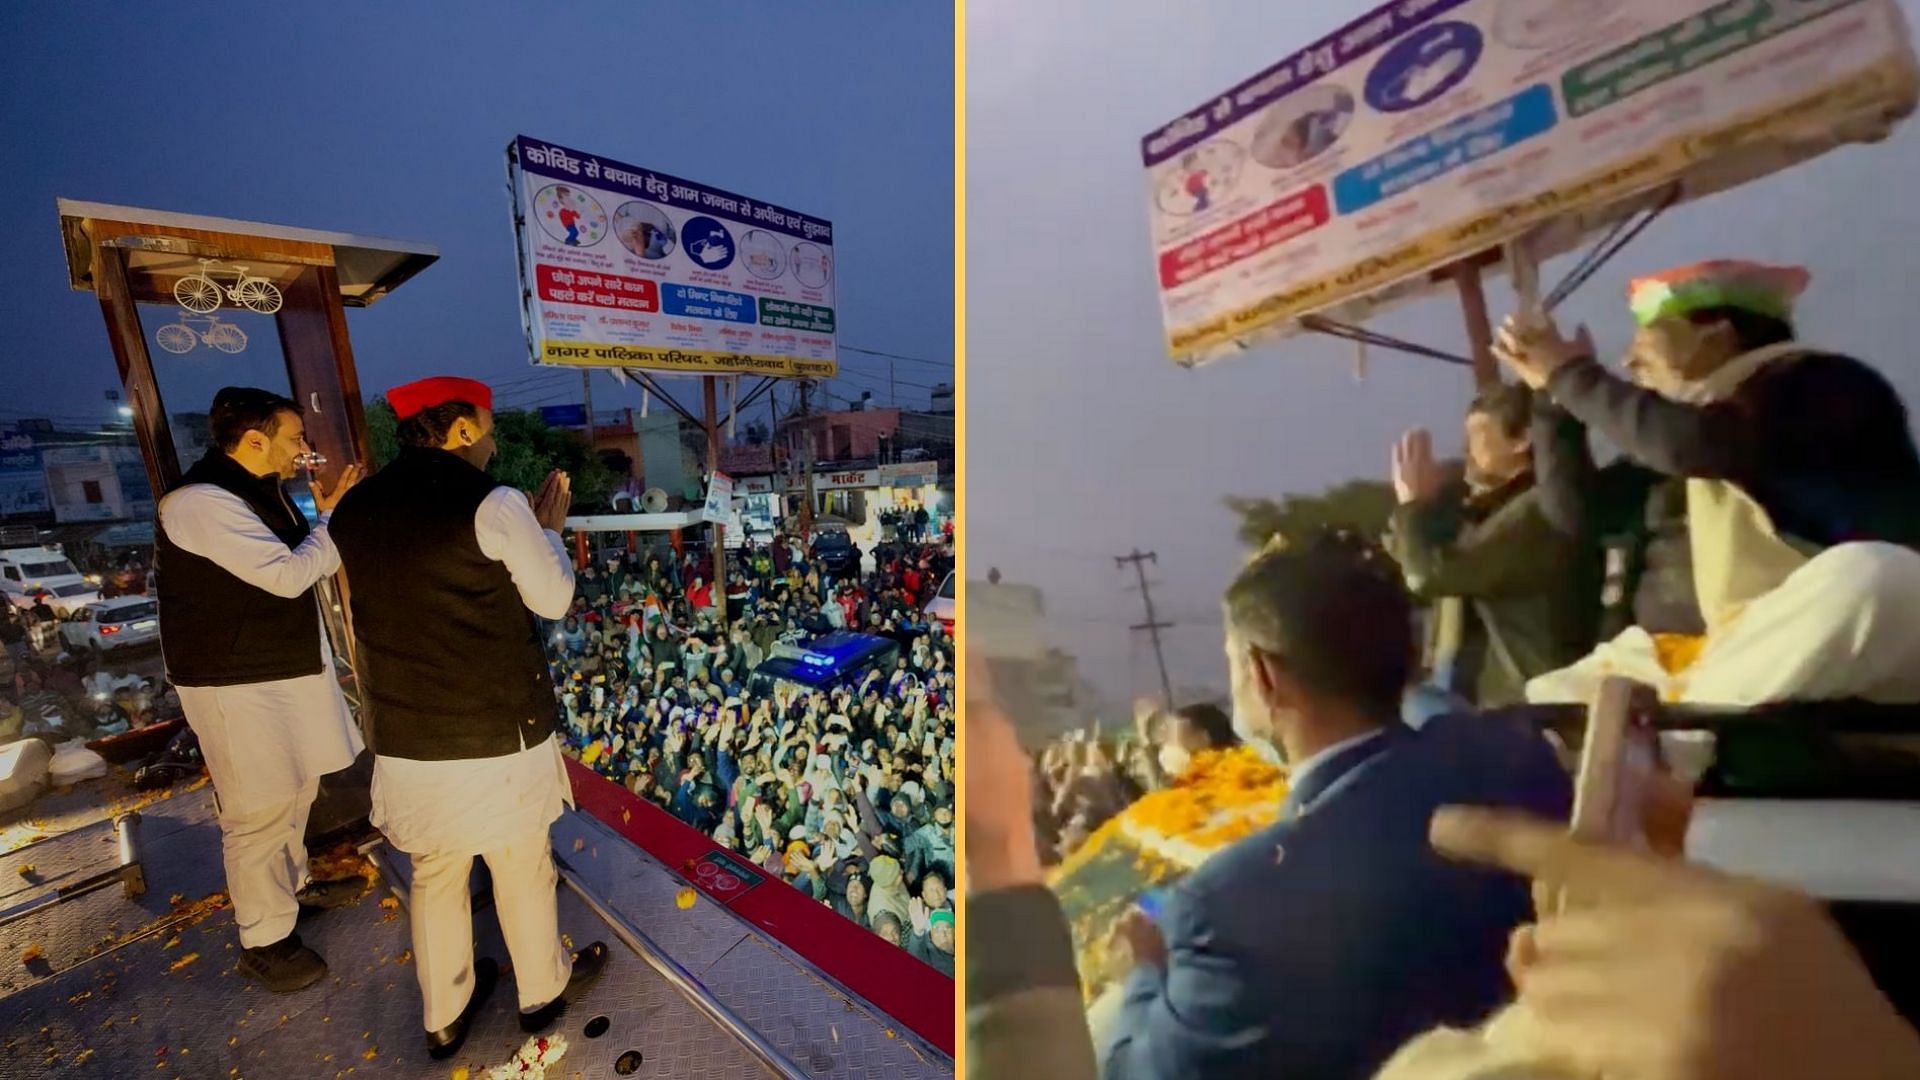 <div class="paragraphs"><p>In a video, Priyanka Gandhi can be seen greeting and waving at the Samajwadi Party chief, who was riding in a repurposed campaign bus with Rashtriya Lok Dal (RLD) chief <a href="https://www.thequint.com/uttar-pradesh-elections/up-elections-rld-sp-alliance-bjp-invites-jayant-chaudhary-rebuffs-ask-farmers-families">Jayant Chaudhary</a>.</p></div>